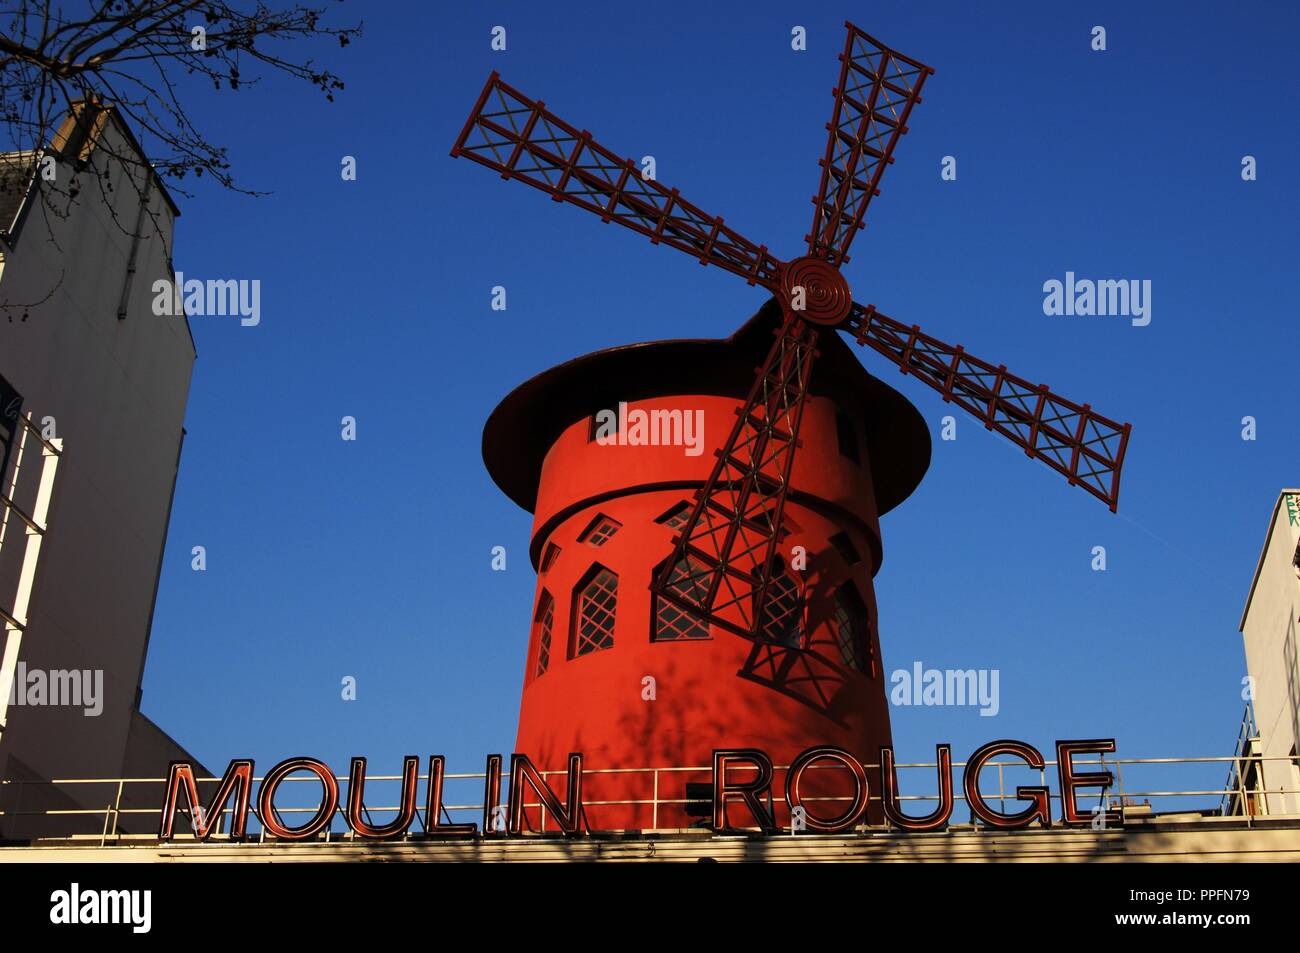 France. Paris. Moulin Rouge. Cabaret, opened in 1889. Built by Adolphe Leon Willette (1857-1926) and Edouard-Jean Niermans (1859-1928). Marked by the red windmill on its roof. Detail. Exterior. Pigalle district. Stock Photo